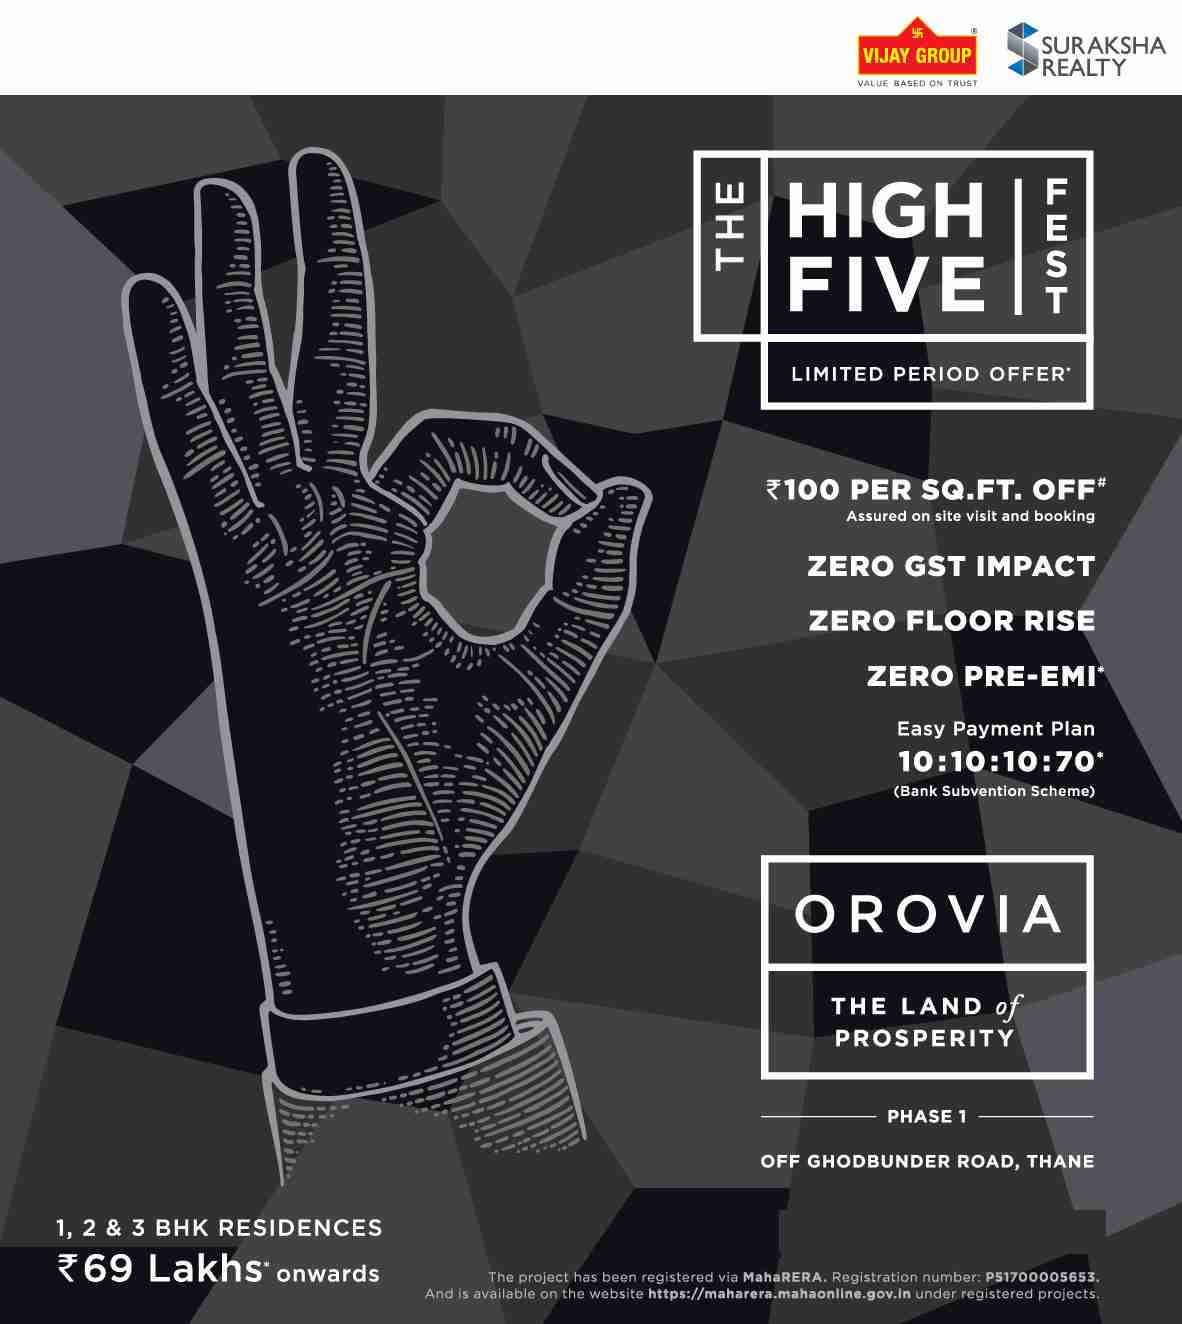 Book home during The High Five Fest offer at Vijay Orovia in Mumbai